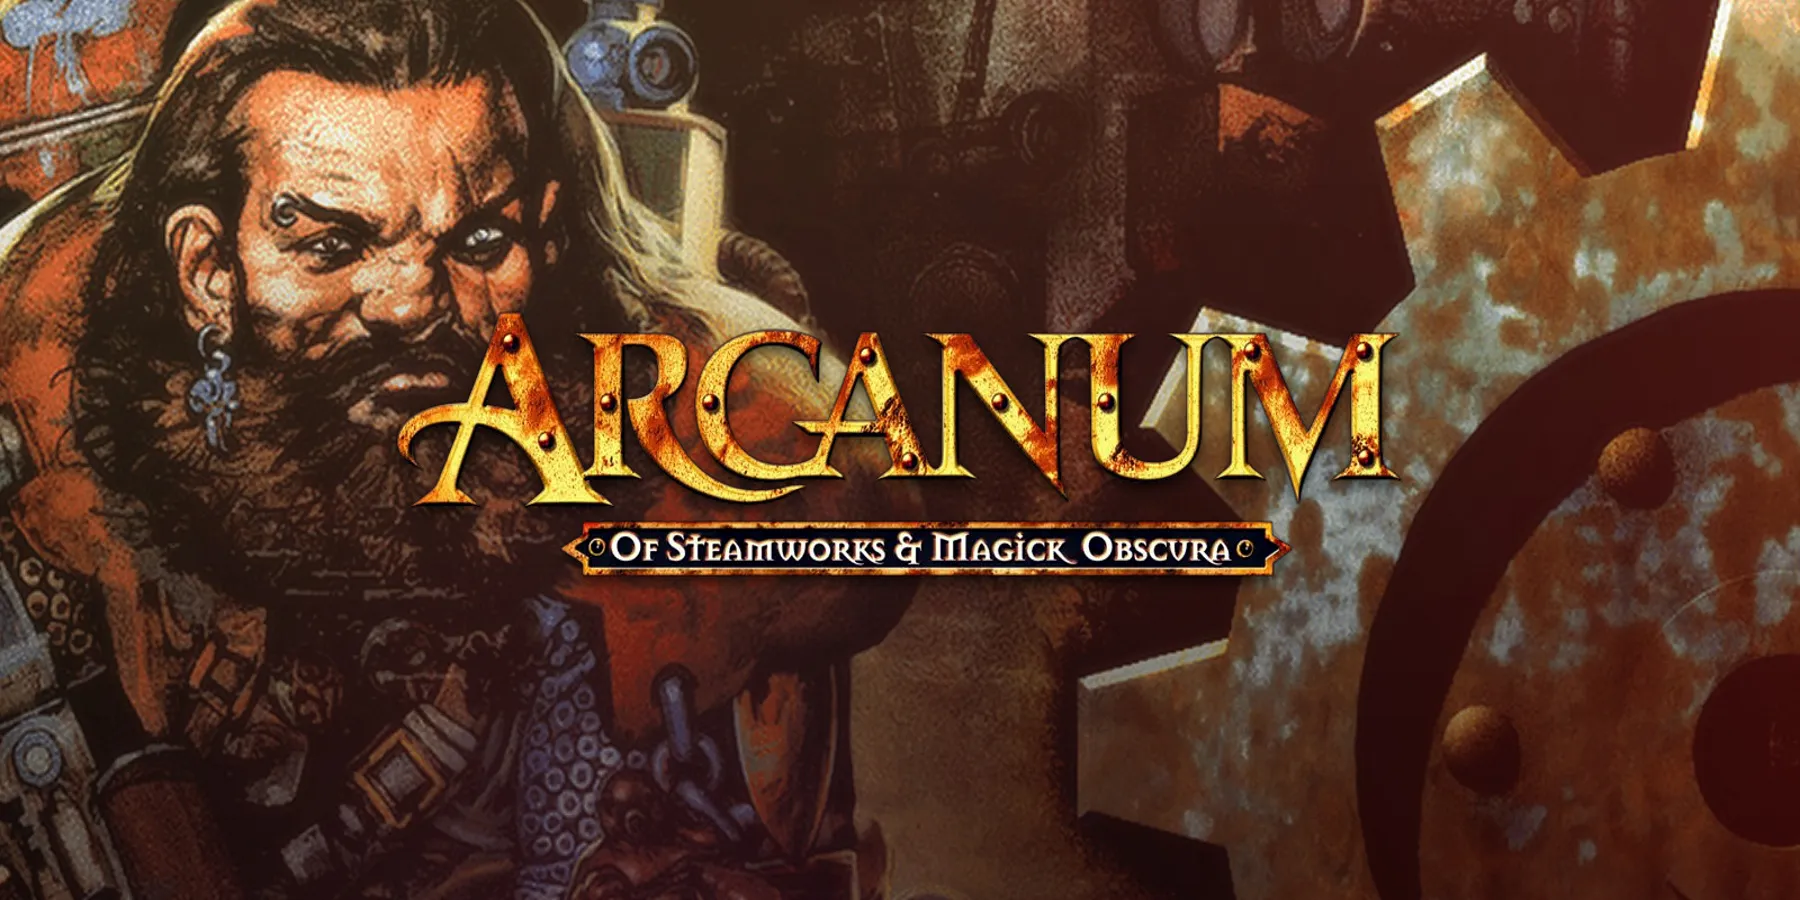 Official art from Arcanum: Of Steamworks and Magick Obscura